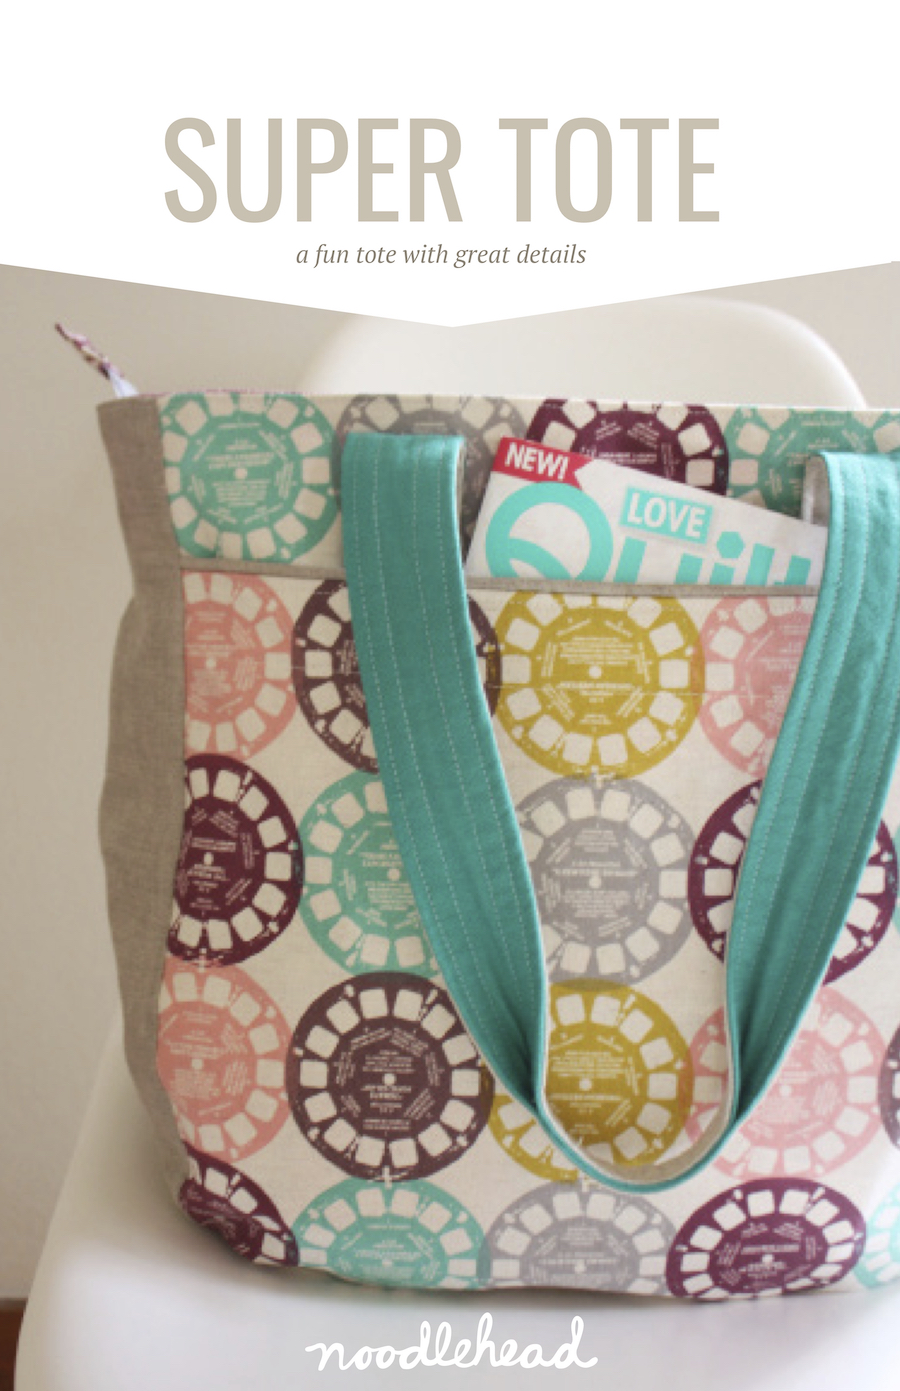 Super Tote Pattern by Noodlehead